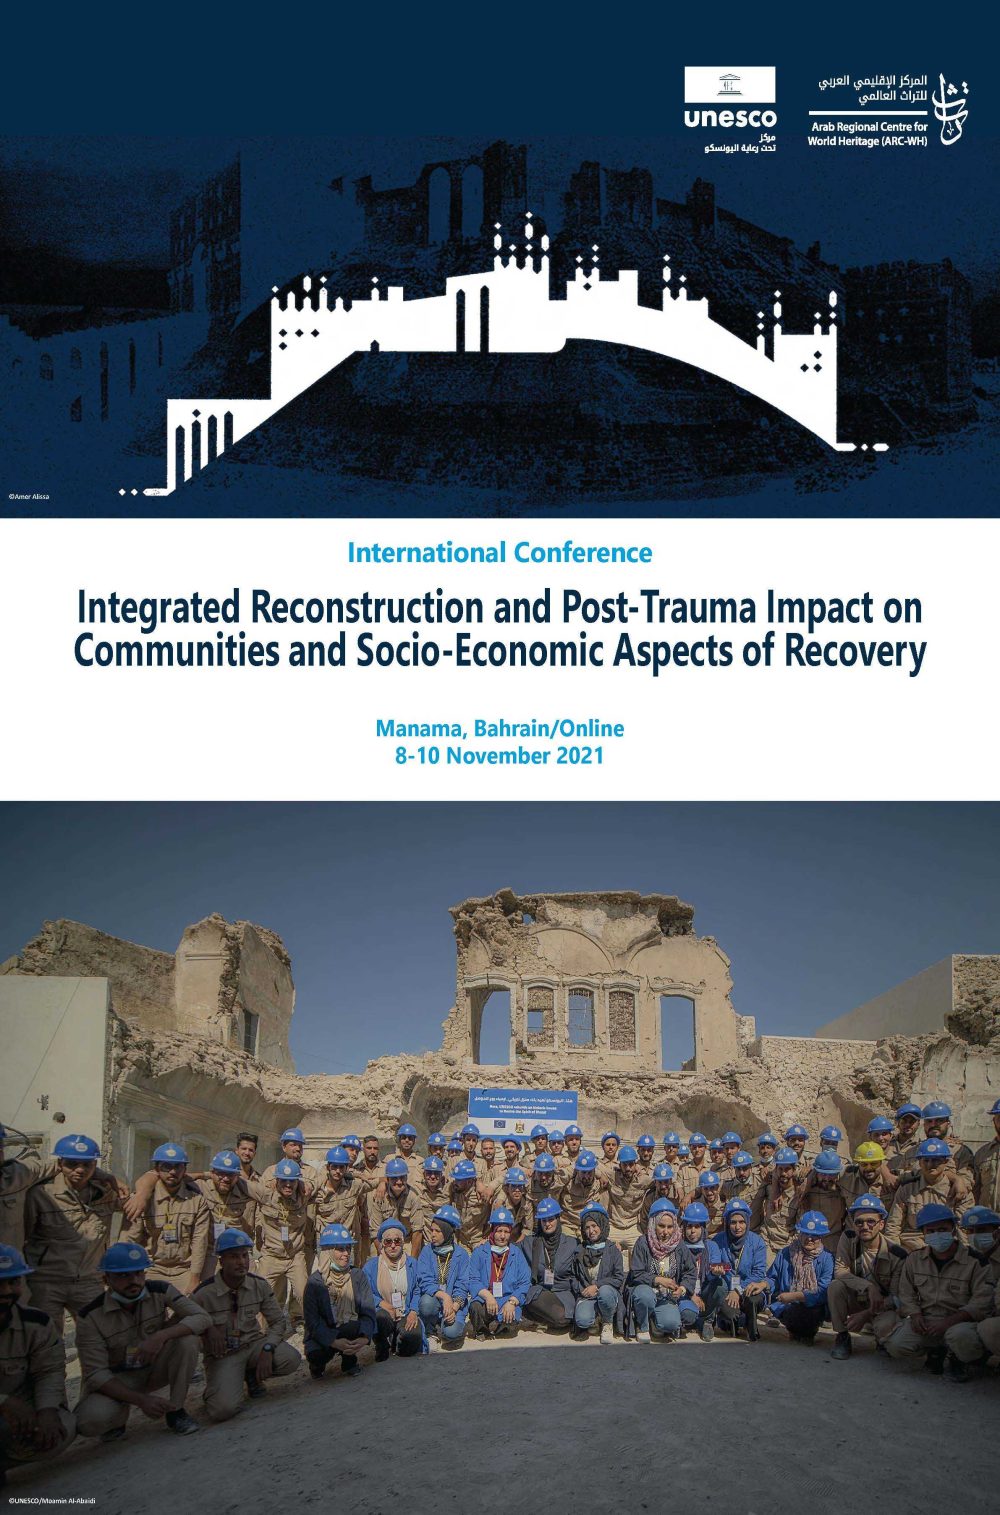 International Conference on Integrated Reconstruction and Post-trauma Impact on Communities and the Socio-Economic Aspects of Recovery